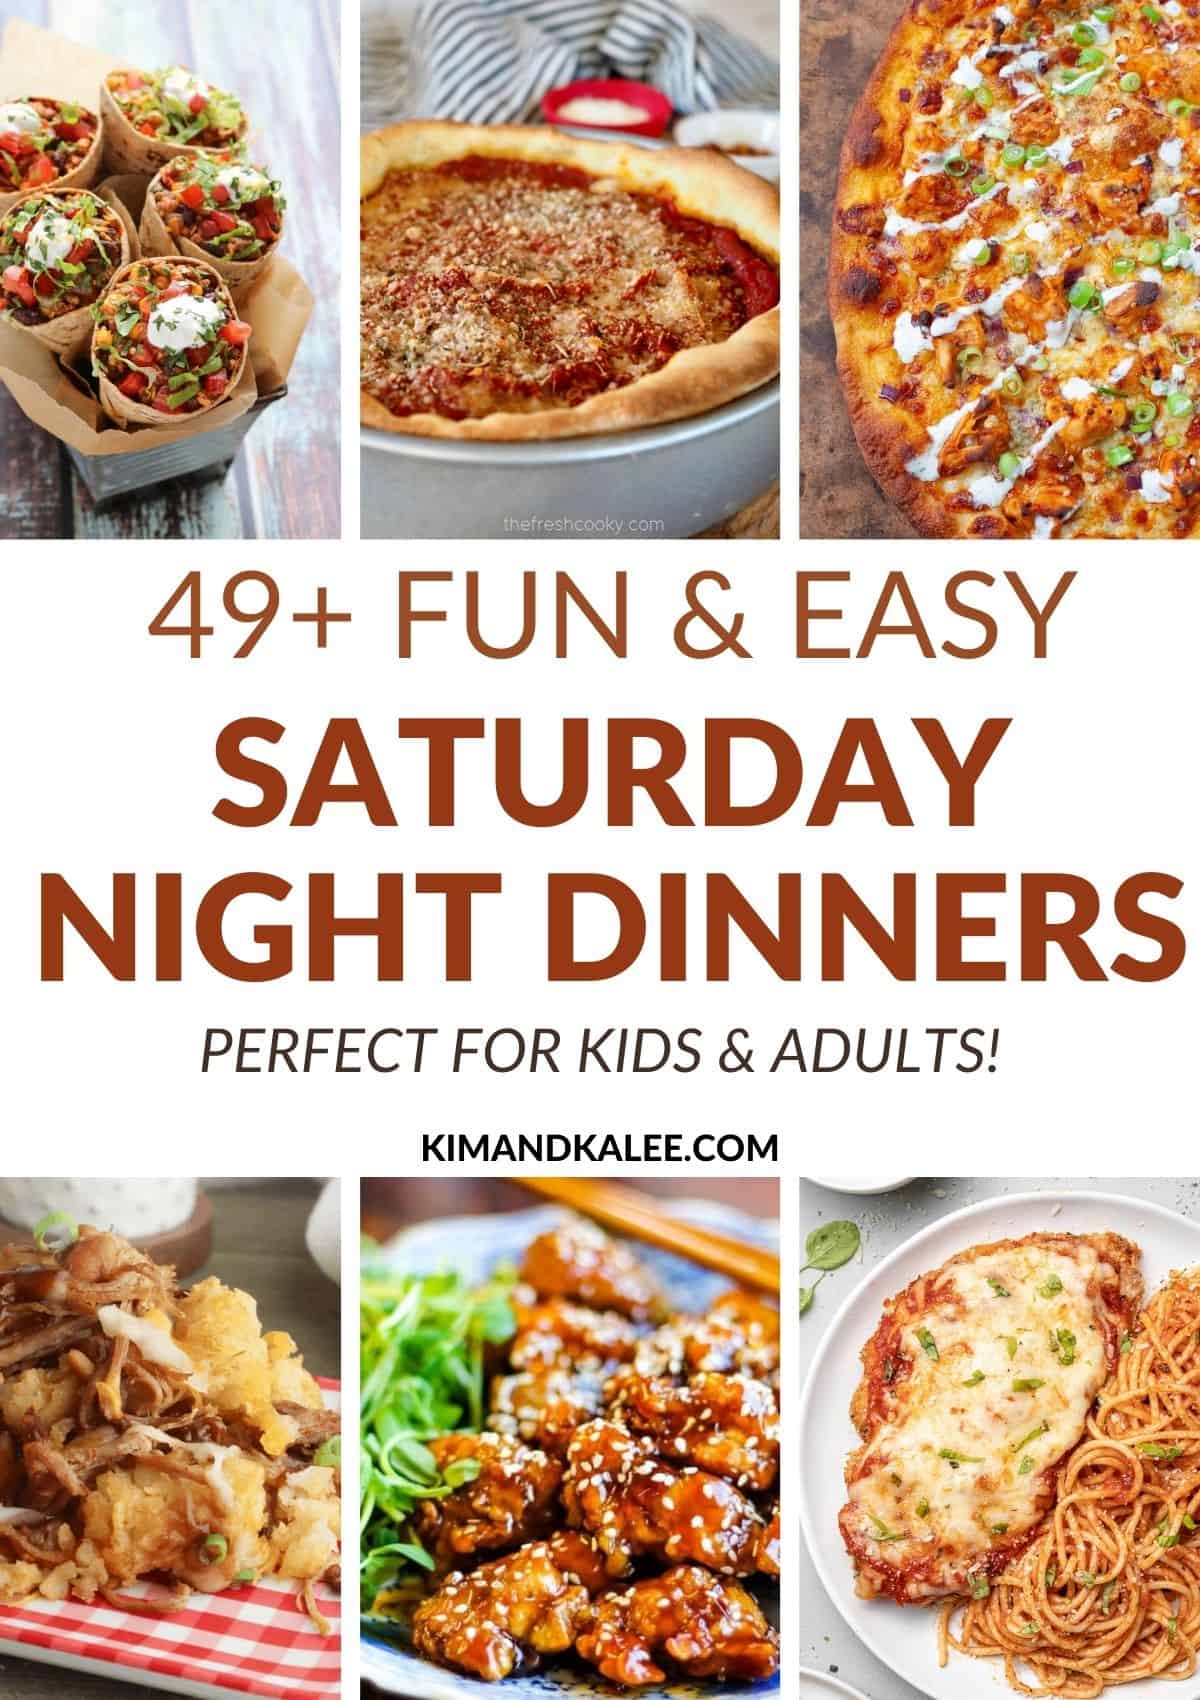 collage of meal ideas with the text overlay 49+ fun & easy saturday night dinners perfect for adults & kids